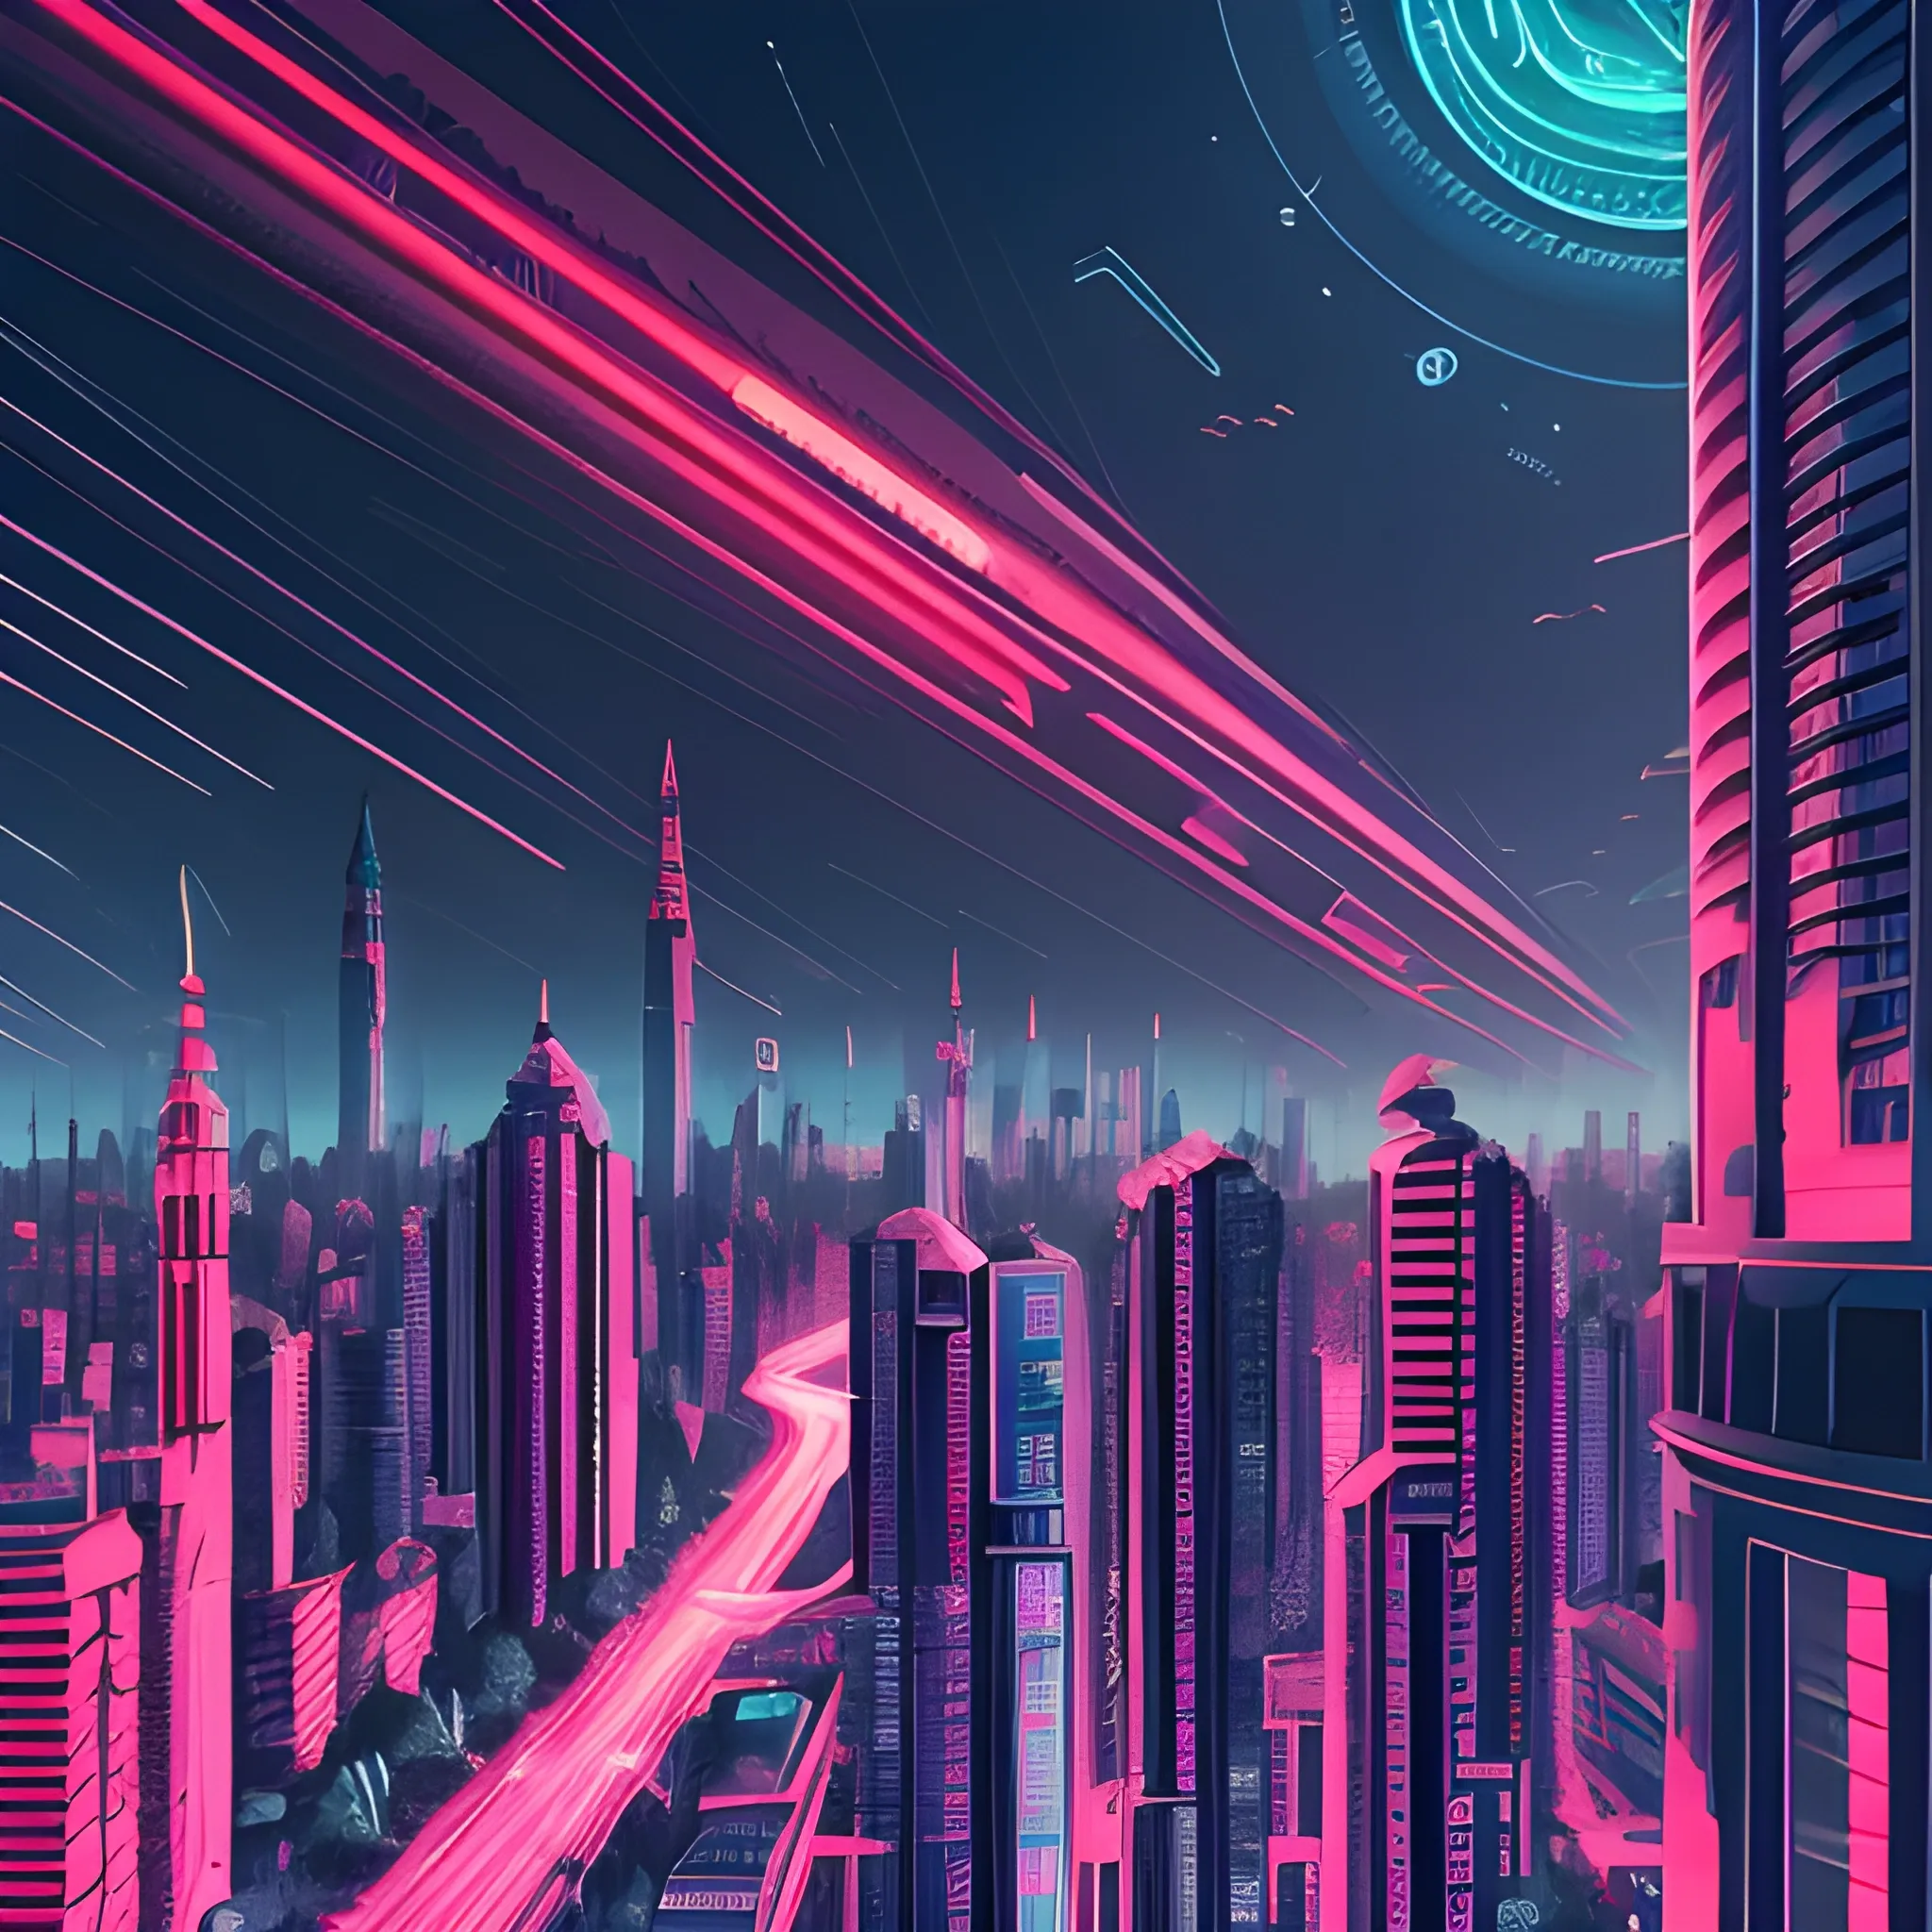 4k, beautiful, city, background of a crypto world by MAD DOG JONES, news app, red black colors, best illustration, no humans, no cars, vaporwave, realistic, dreamscape, incredible details, liminal space, highly detailed, cinematic ,rim lighting, trending on Behance HD

